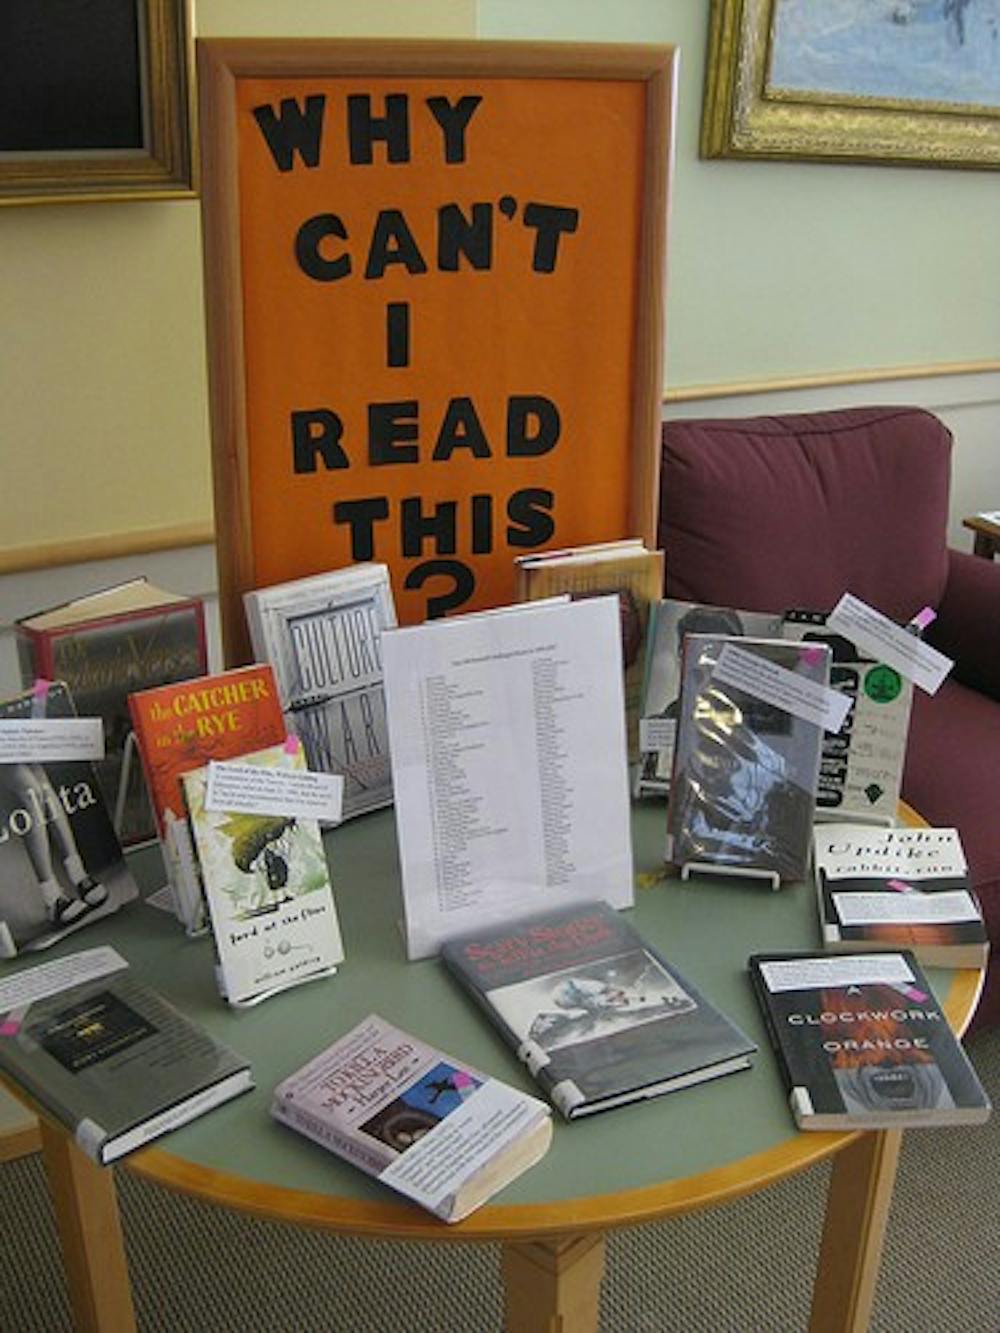 	<p>A display of banned books taken by <a href="http://www.flickr.com/photos/peskylibrary/3252638031/">Pesky Library</a> on <a href="http://www.flickr.com/photos/peskylibrary/3252638031/">Flickr Creative Commons</a>.</p>